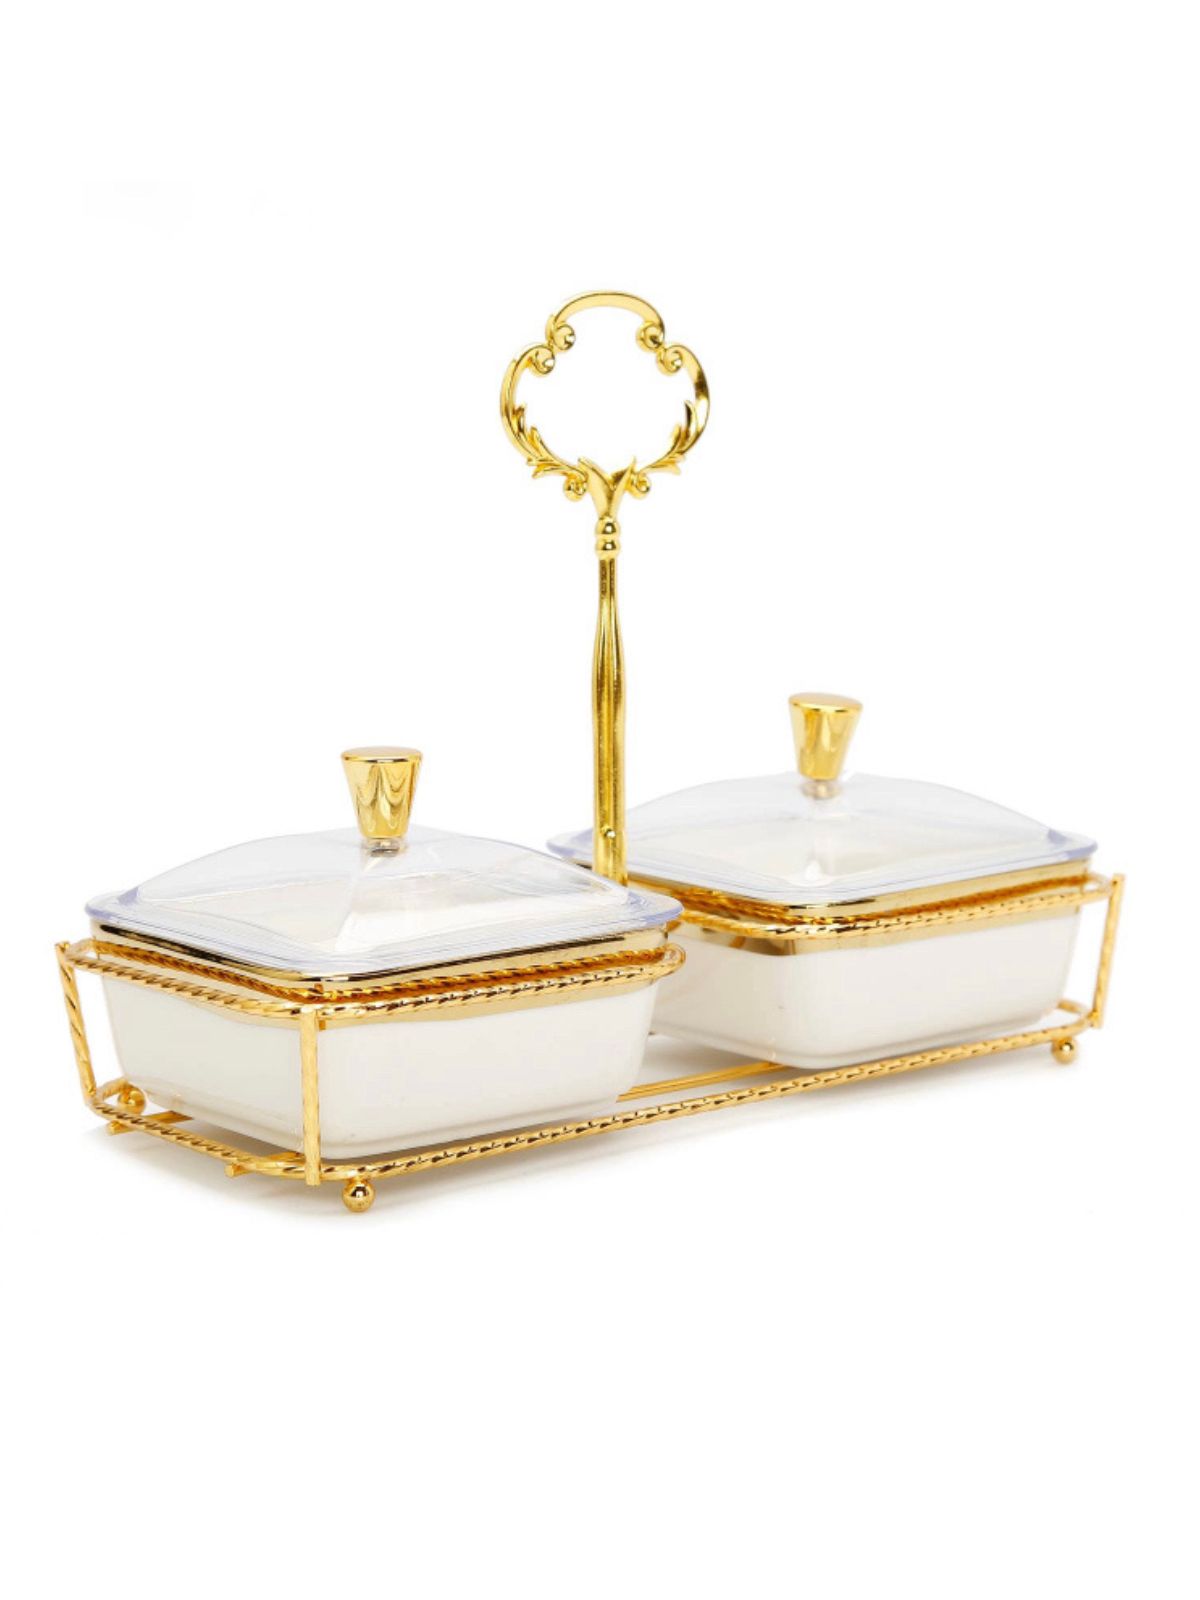 Bring sheer elegance to the table with this porcelain relish dish featuring 2 bowls on a gold base. The white bowls are enhanced by an elegant gold sculpting along the base and middle It includes covers to ensure a spill-free serving experience. 